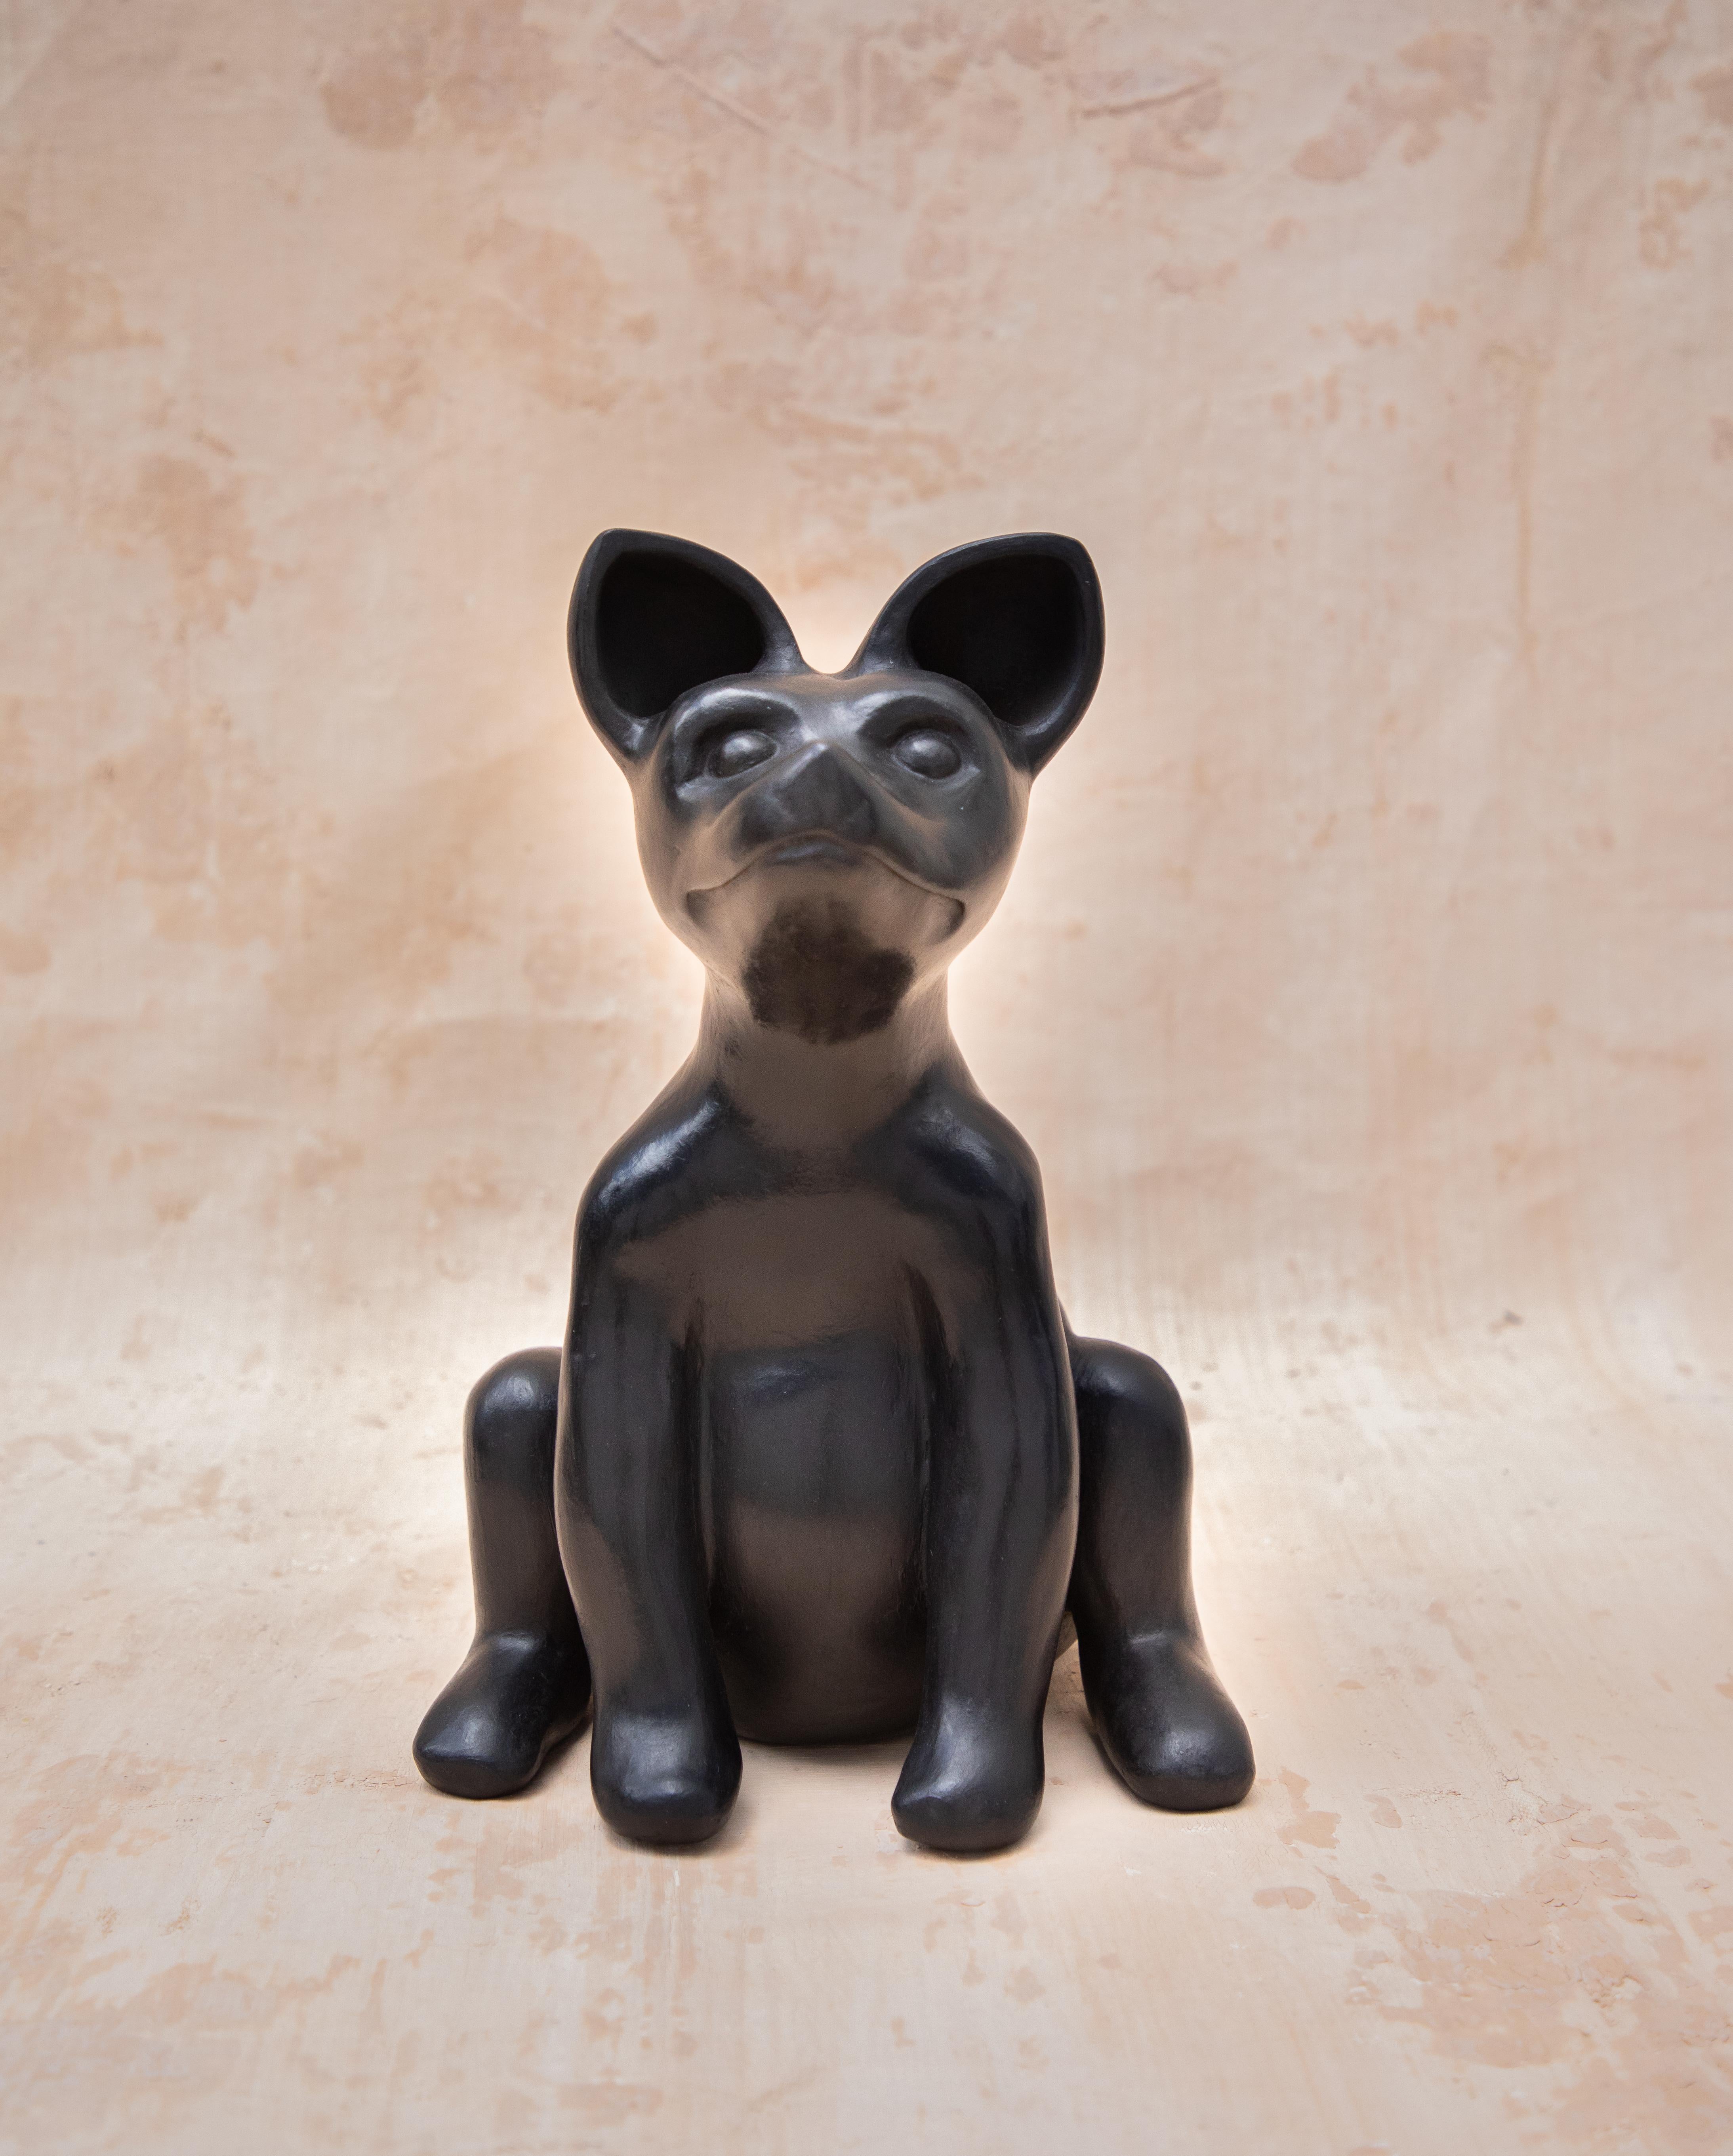 Sitting Xolo by Onora
Dimensions: W 30 x H 25 cm.
Materials: clay, glazed pottery.

Xolo, short for xoloitzcuintle is a breed of dog that has long been a culturally-significant symbol in Mexico. These dogs were considered sacred by the Aztecs